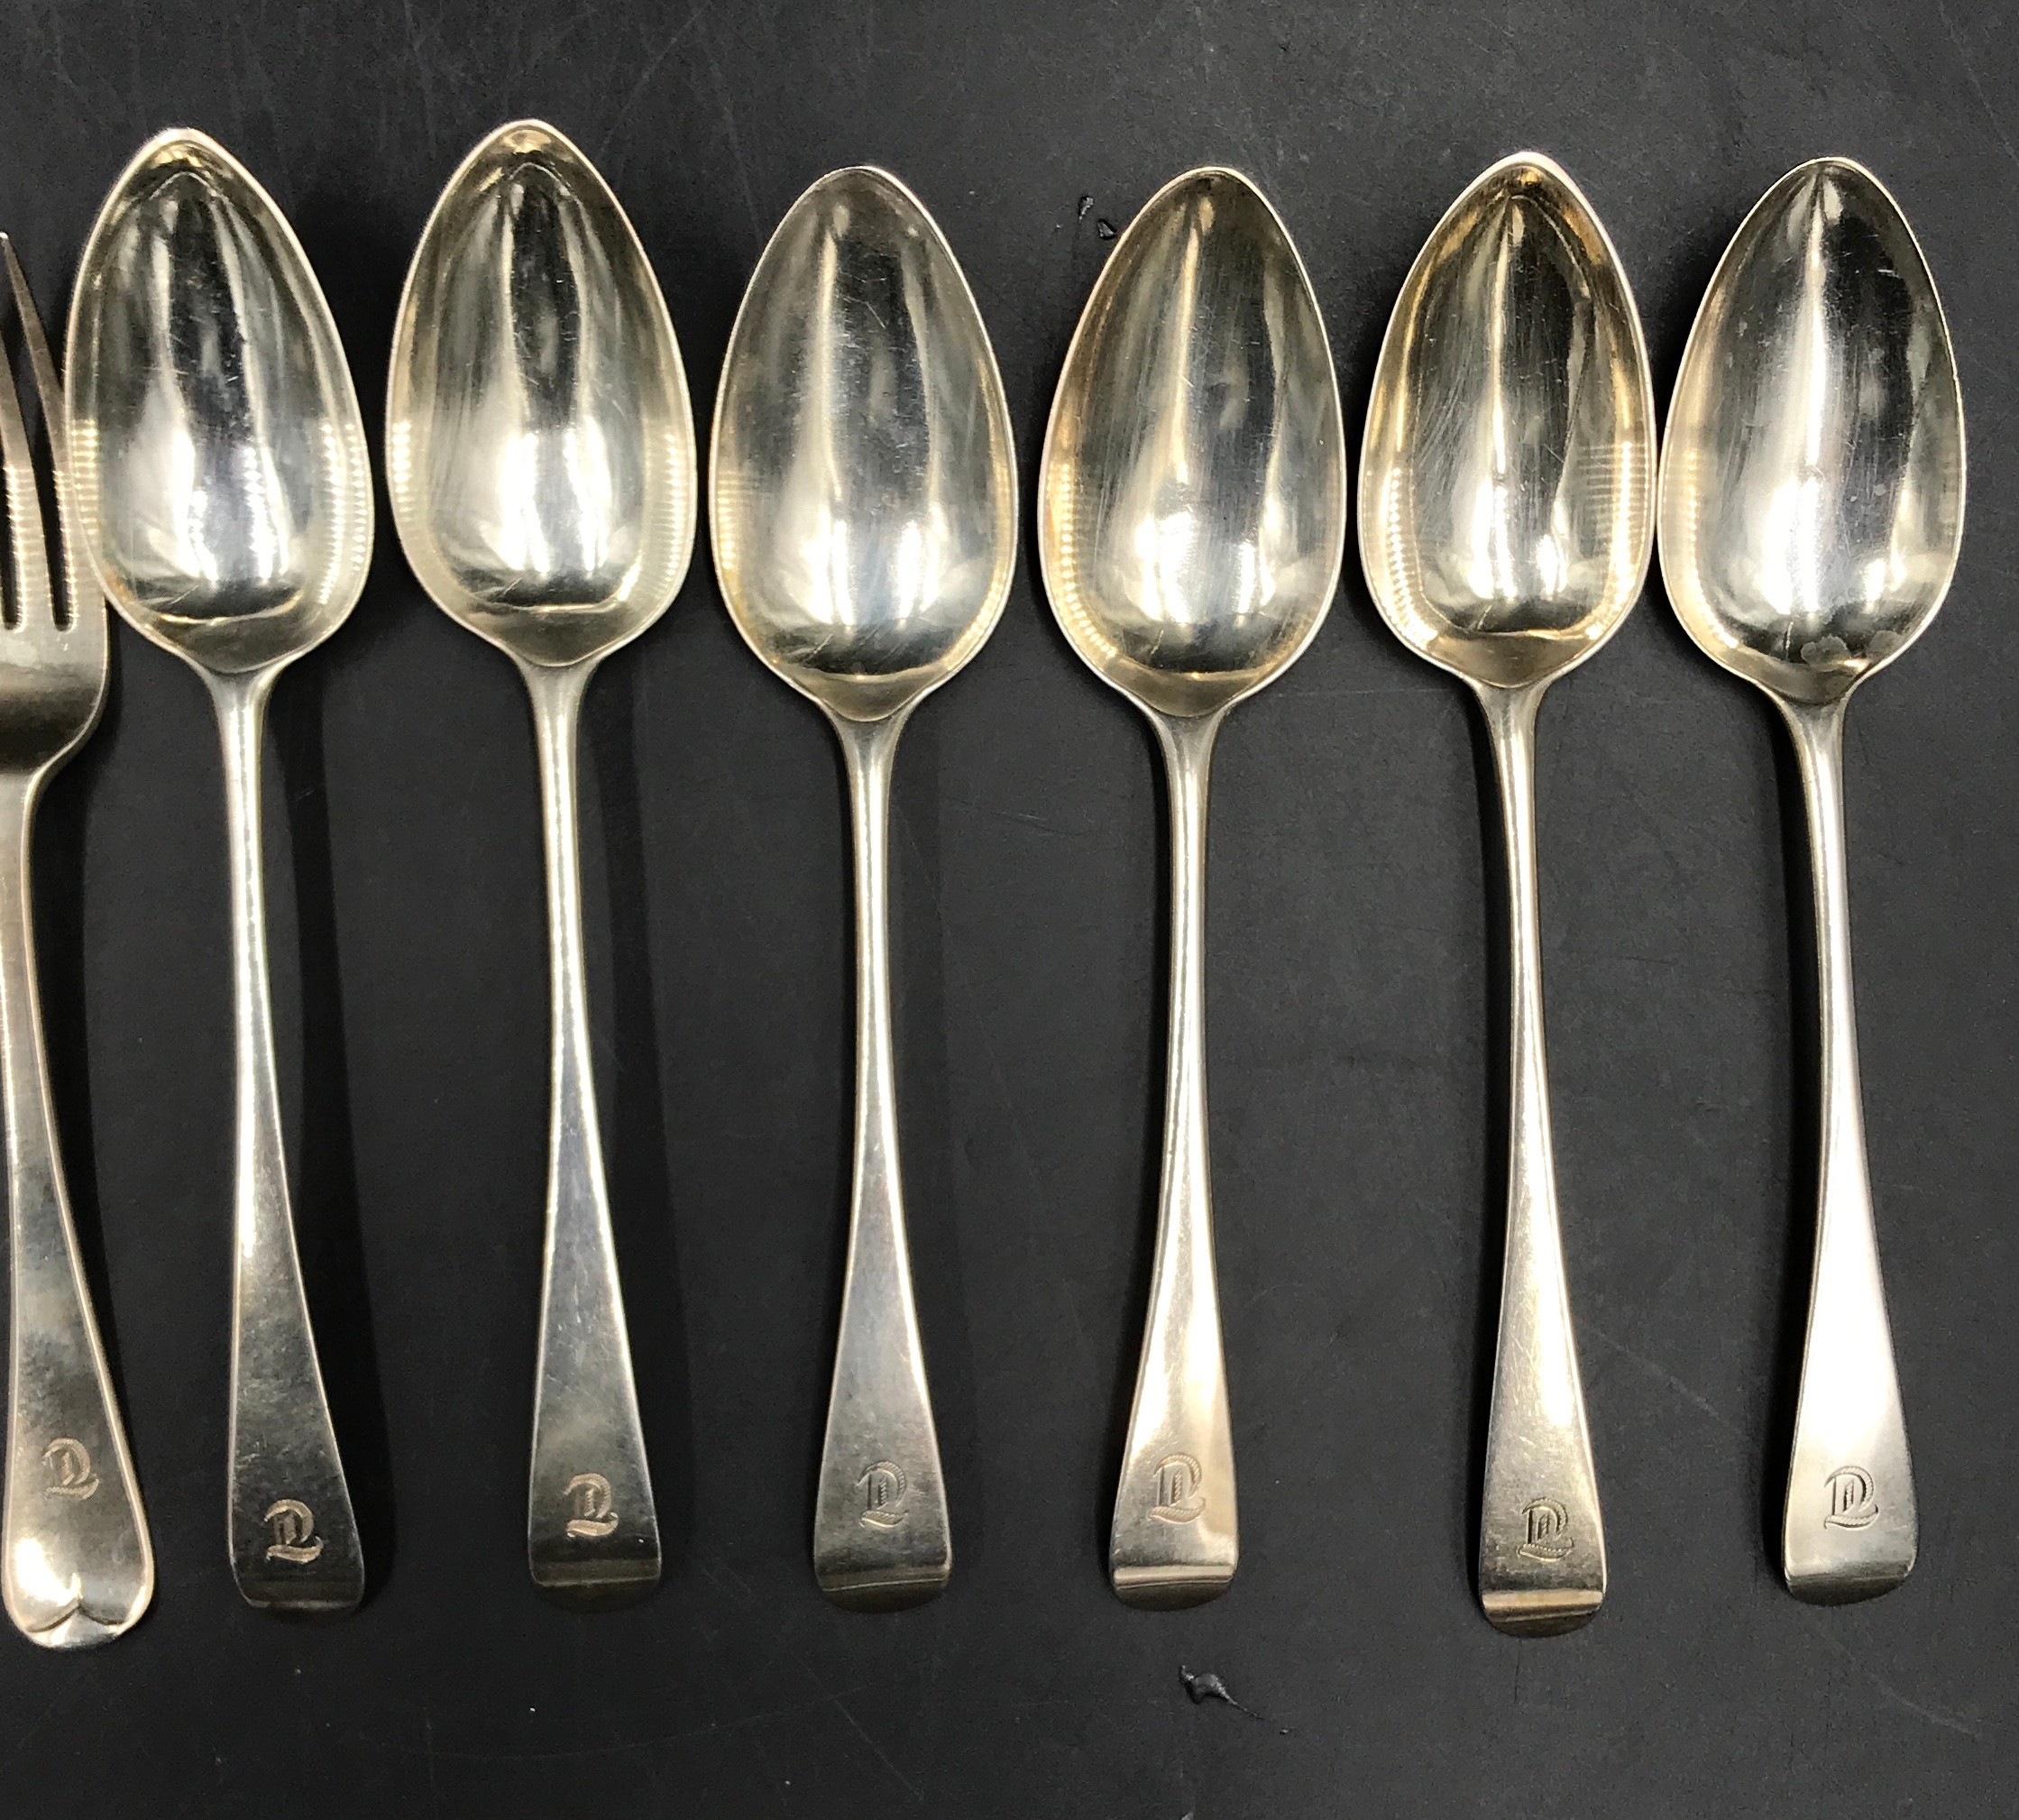 A harlequin set of Old English Pattern cutlery, six table forks, London 1828, maker Josiah Piercy I, - Image 4 of 5